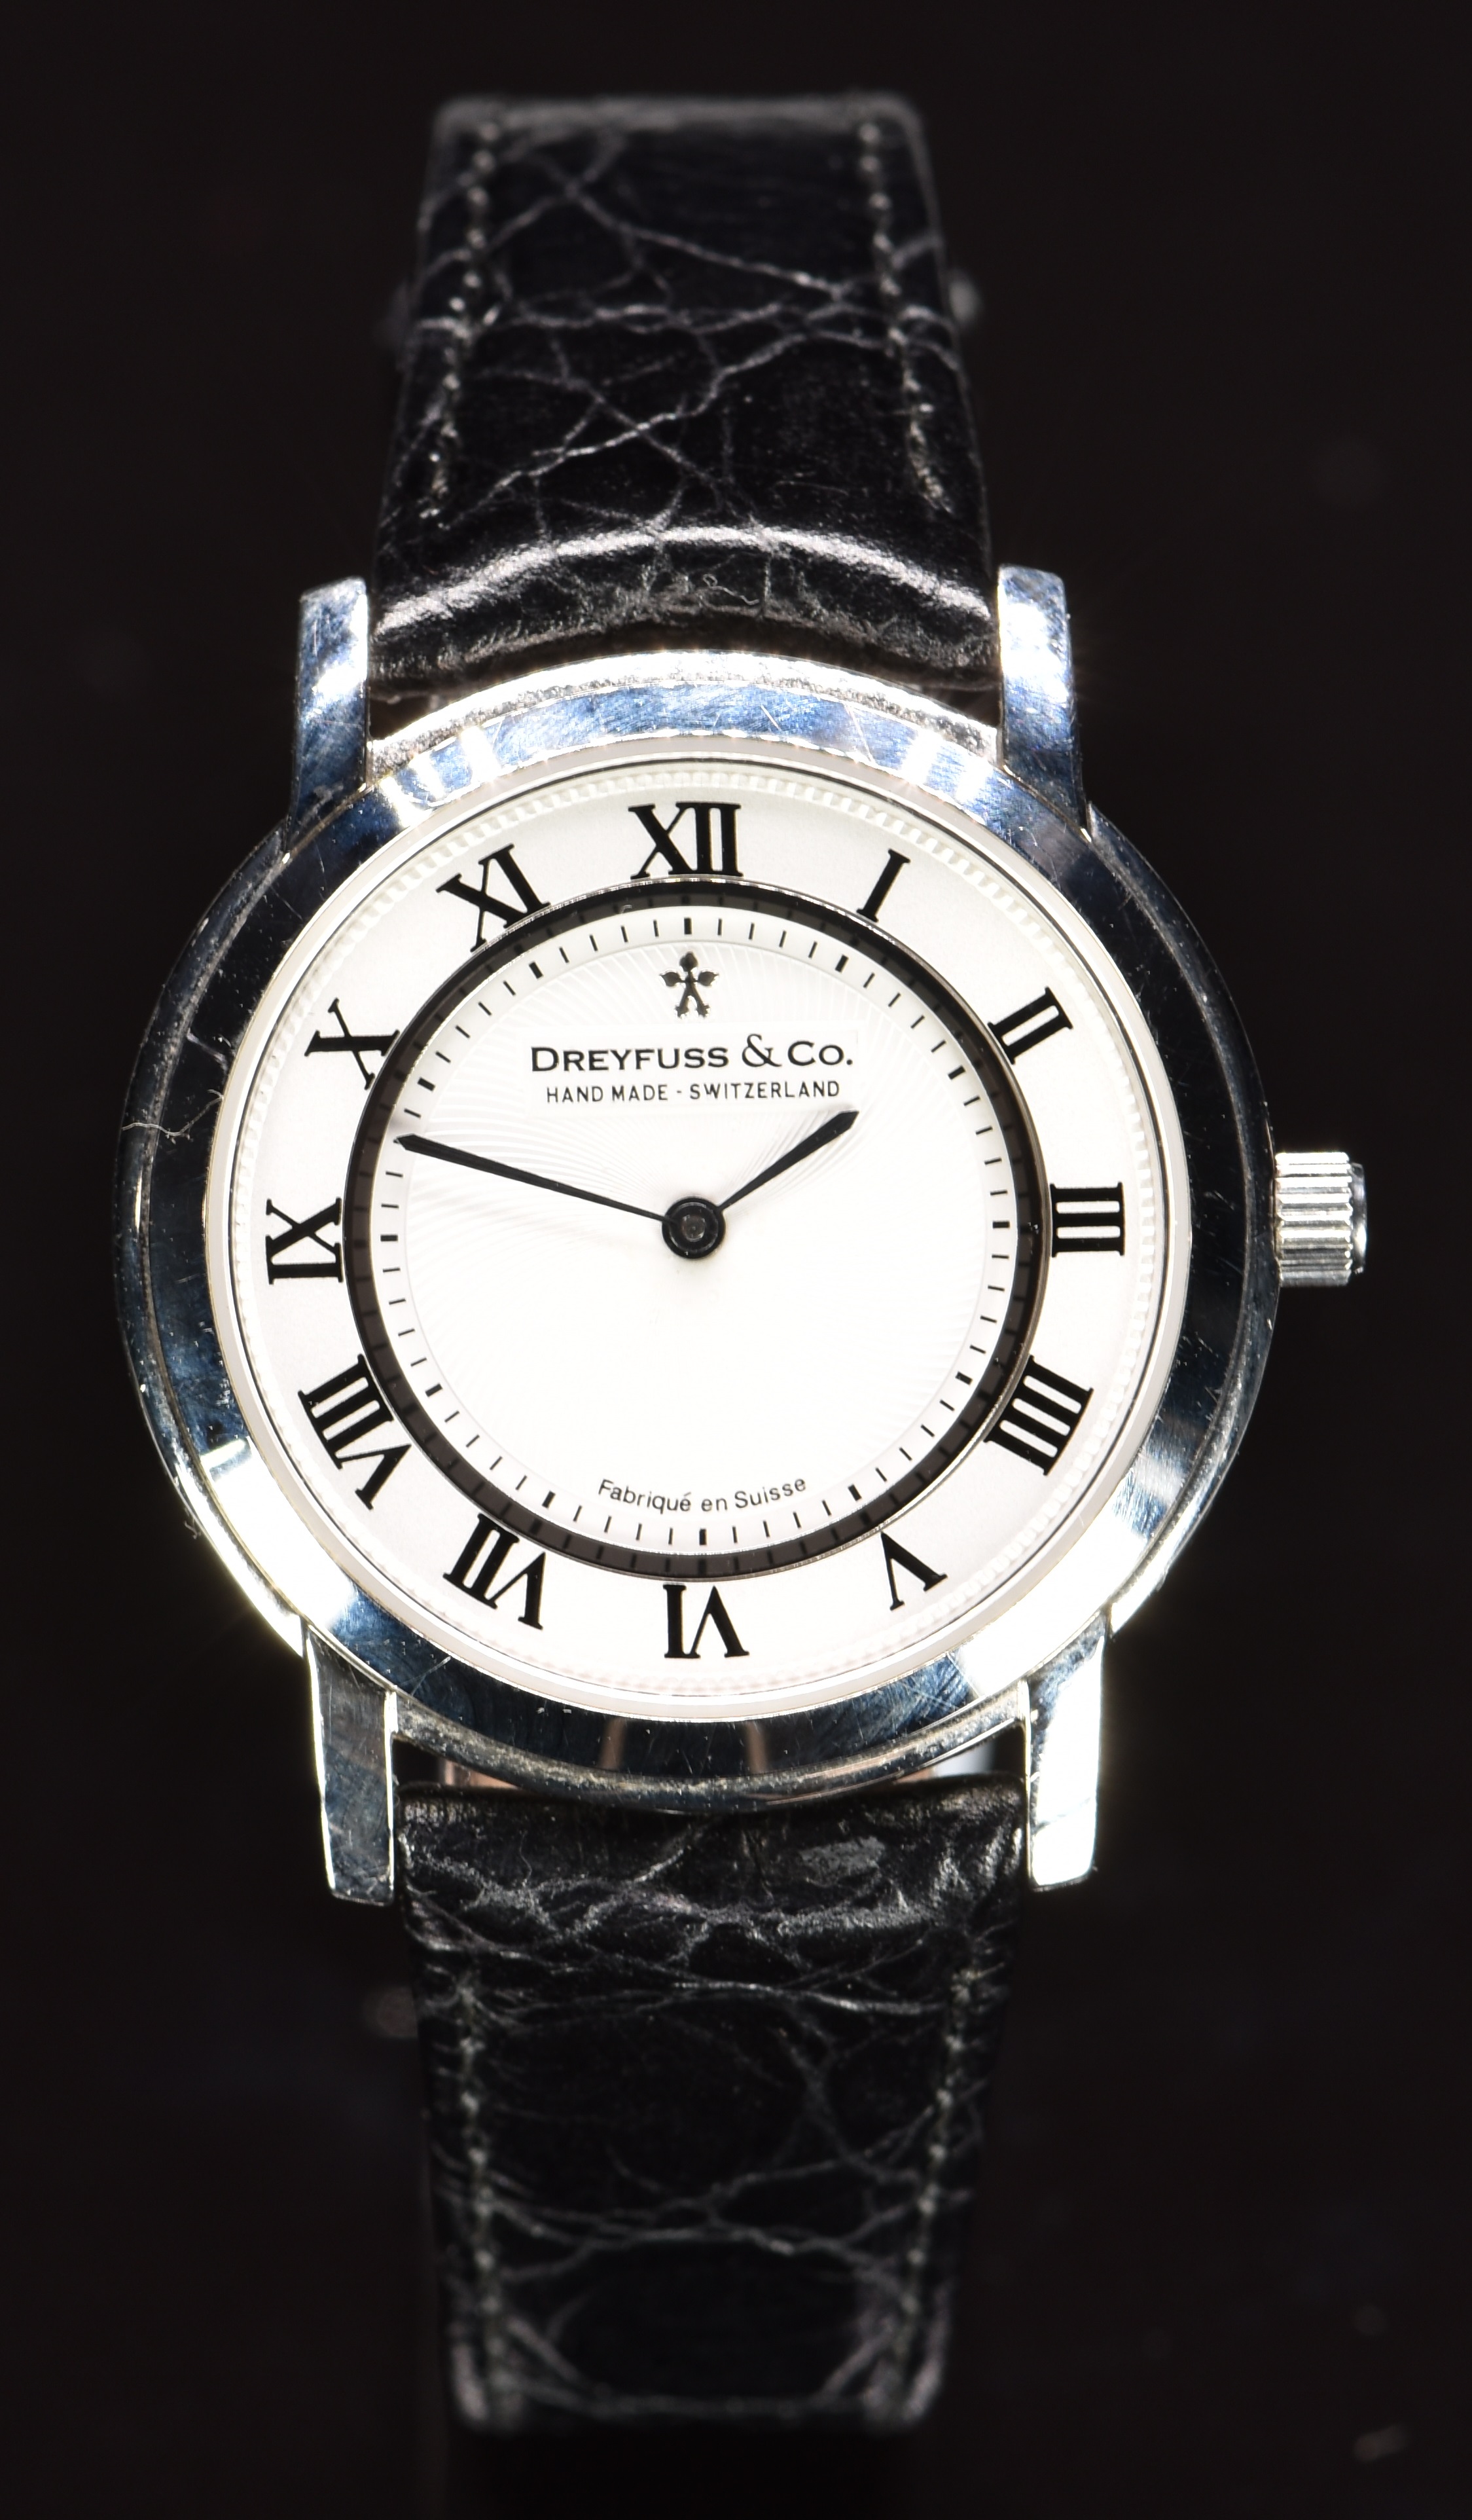 Dreyfuss & Co gentleman's wristwatch with blued hands, black Roman numerals, white dial, stainless